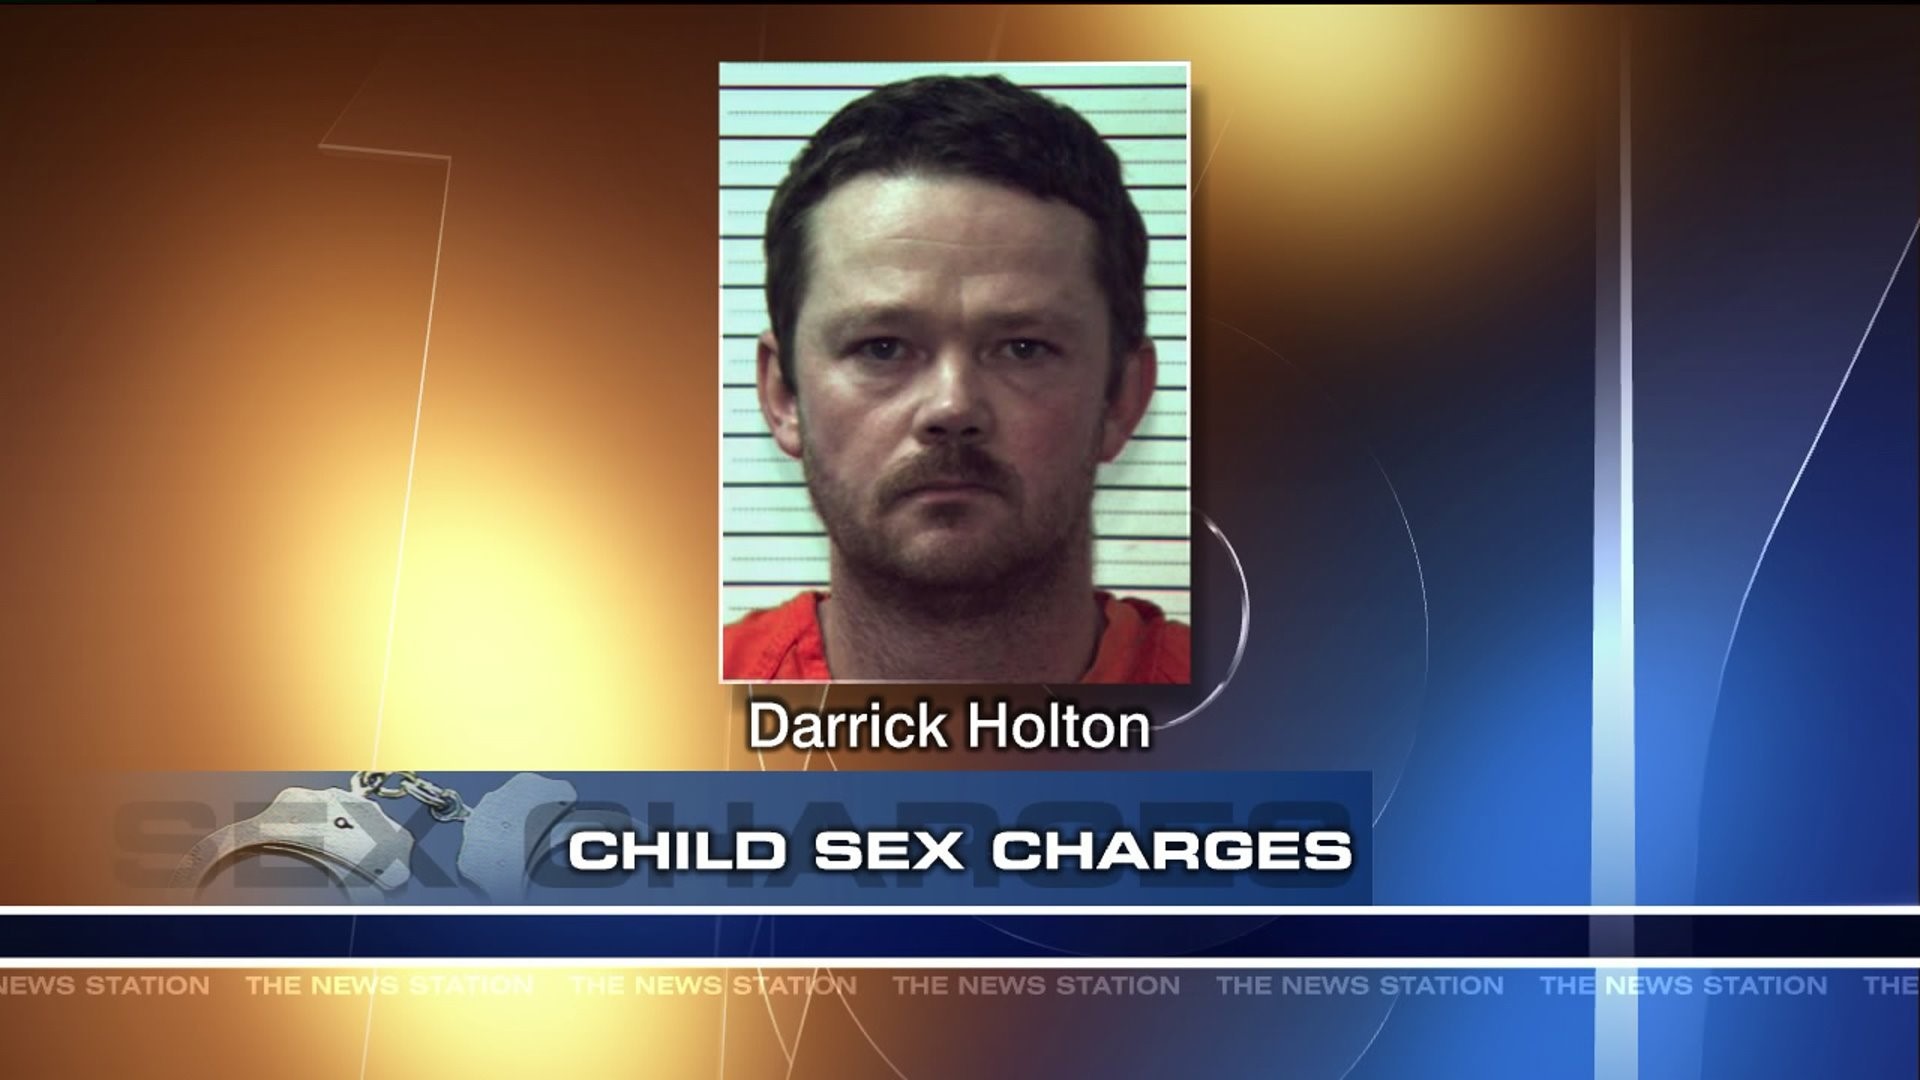 Bradford County Inmate Hit with Child Sex Charges